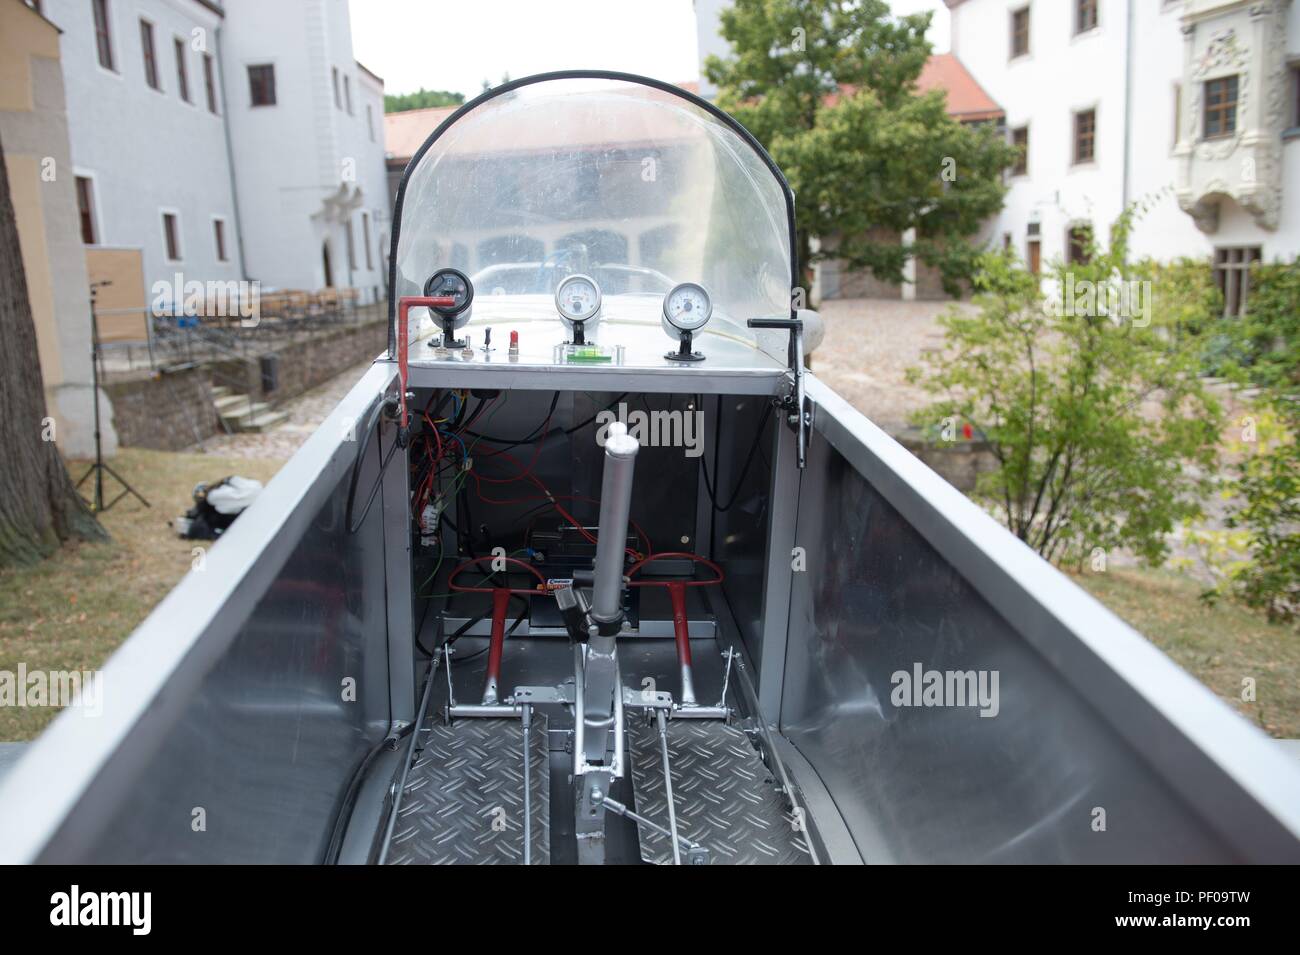 Meissen, Germany. 18th Aug, 2018. The cockpit of Michael Schlosser's  self-built aircraft "Ikarus". Born in Thuringia, Schlosser secretly built a  plane in the GDR in 1983 to flee to West Germany, but